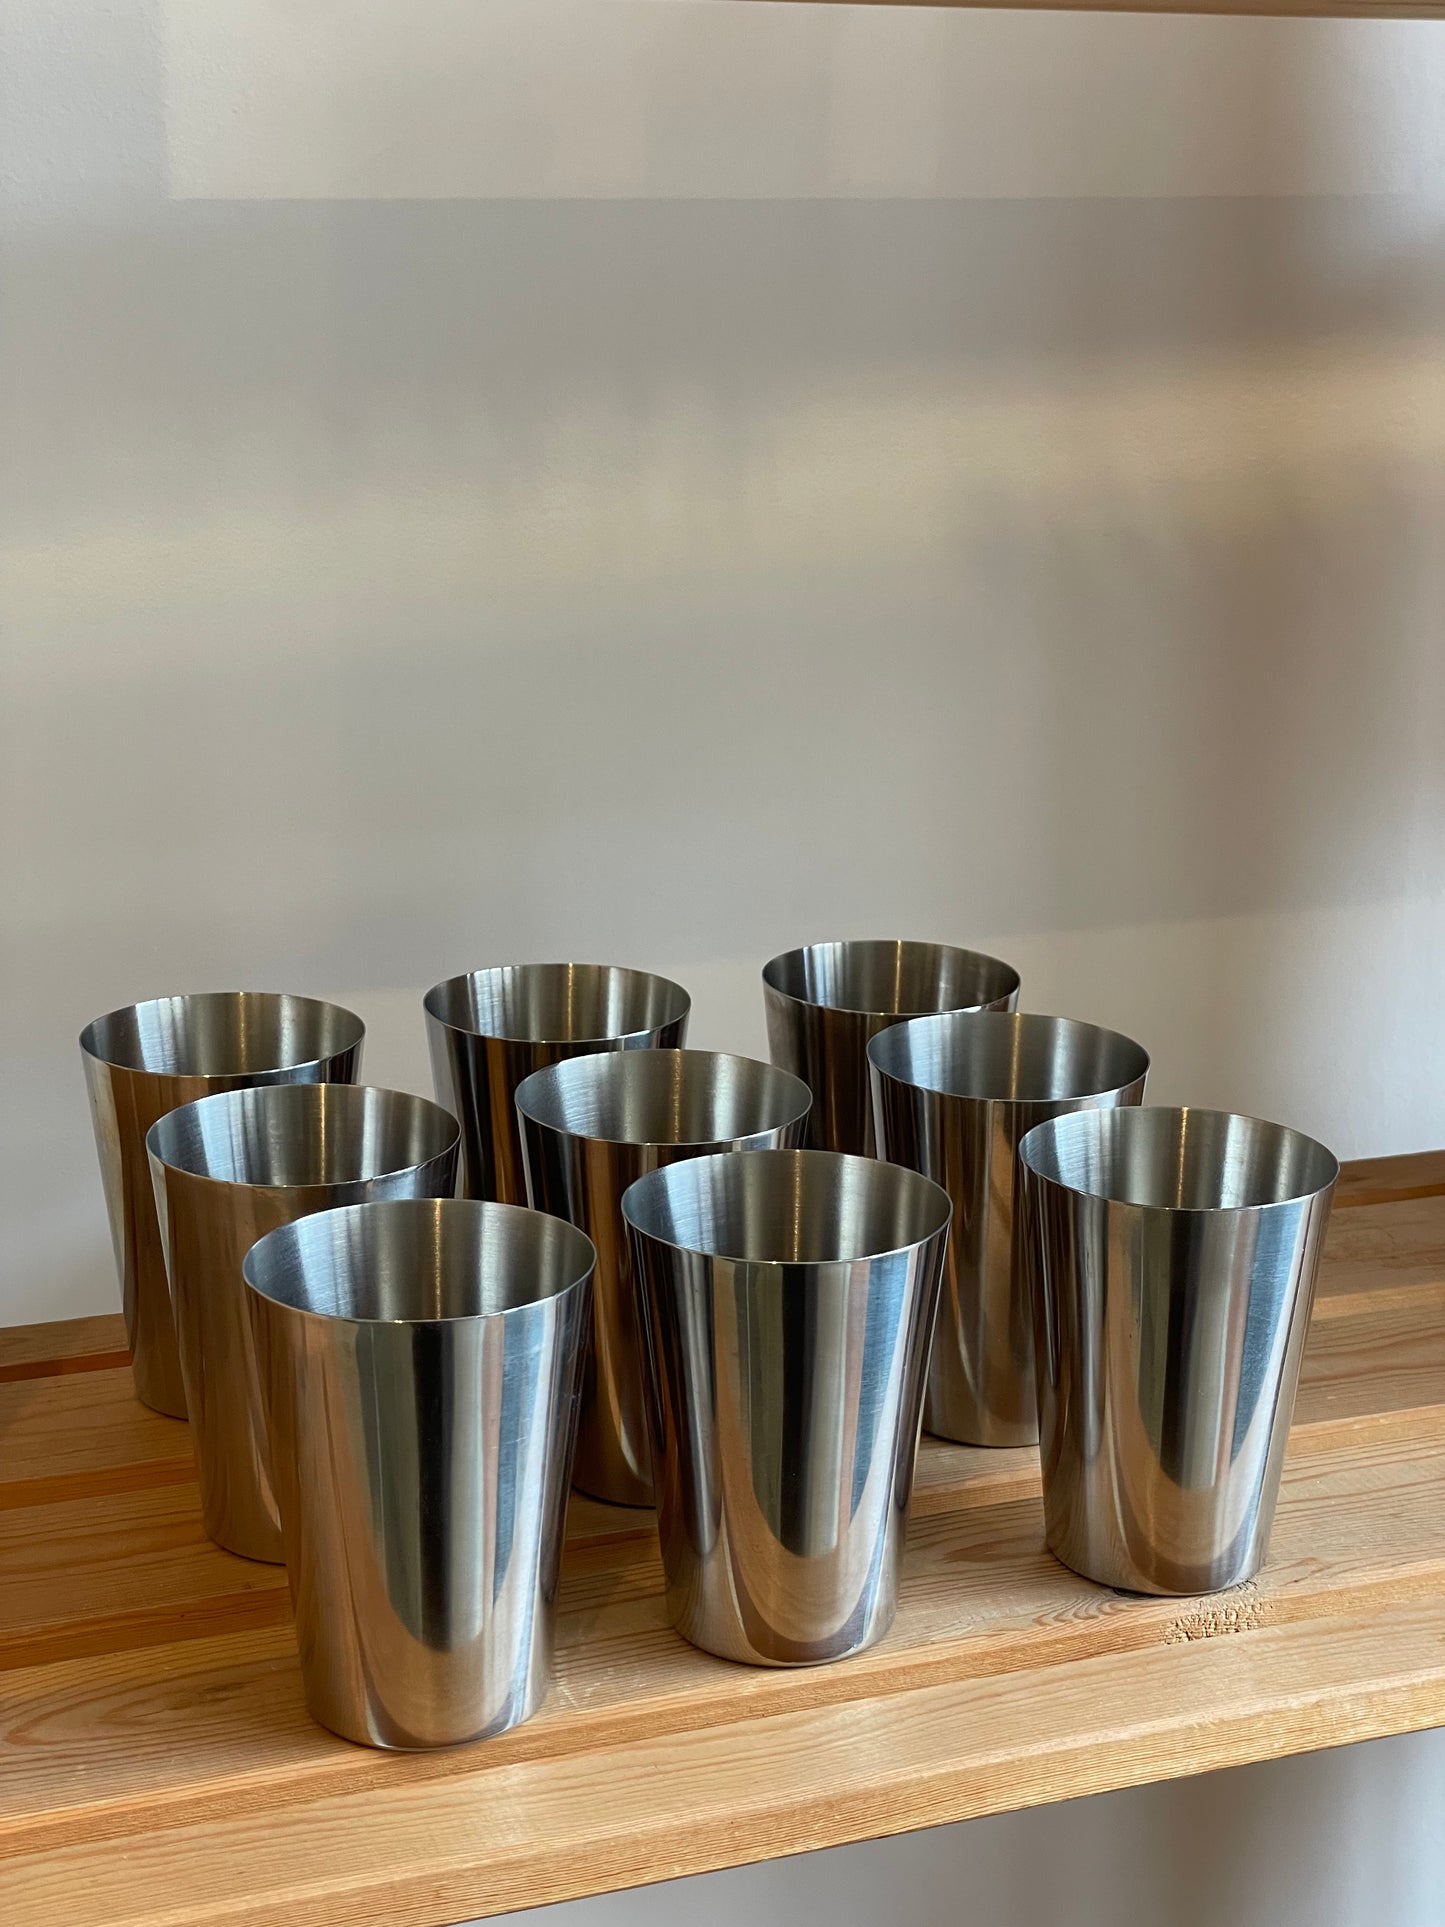 Stainless steel cups